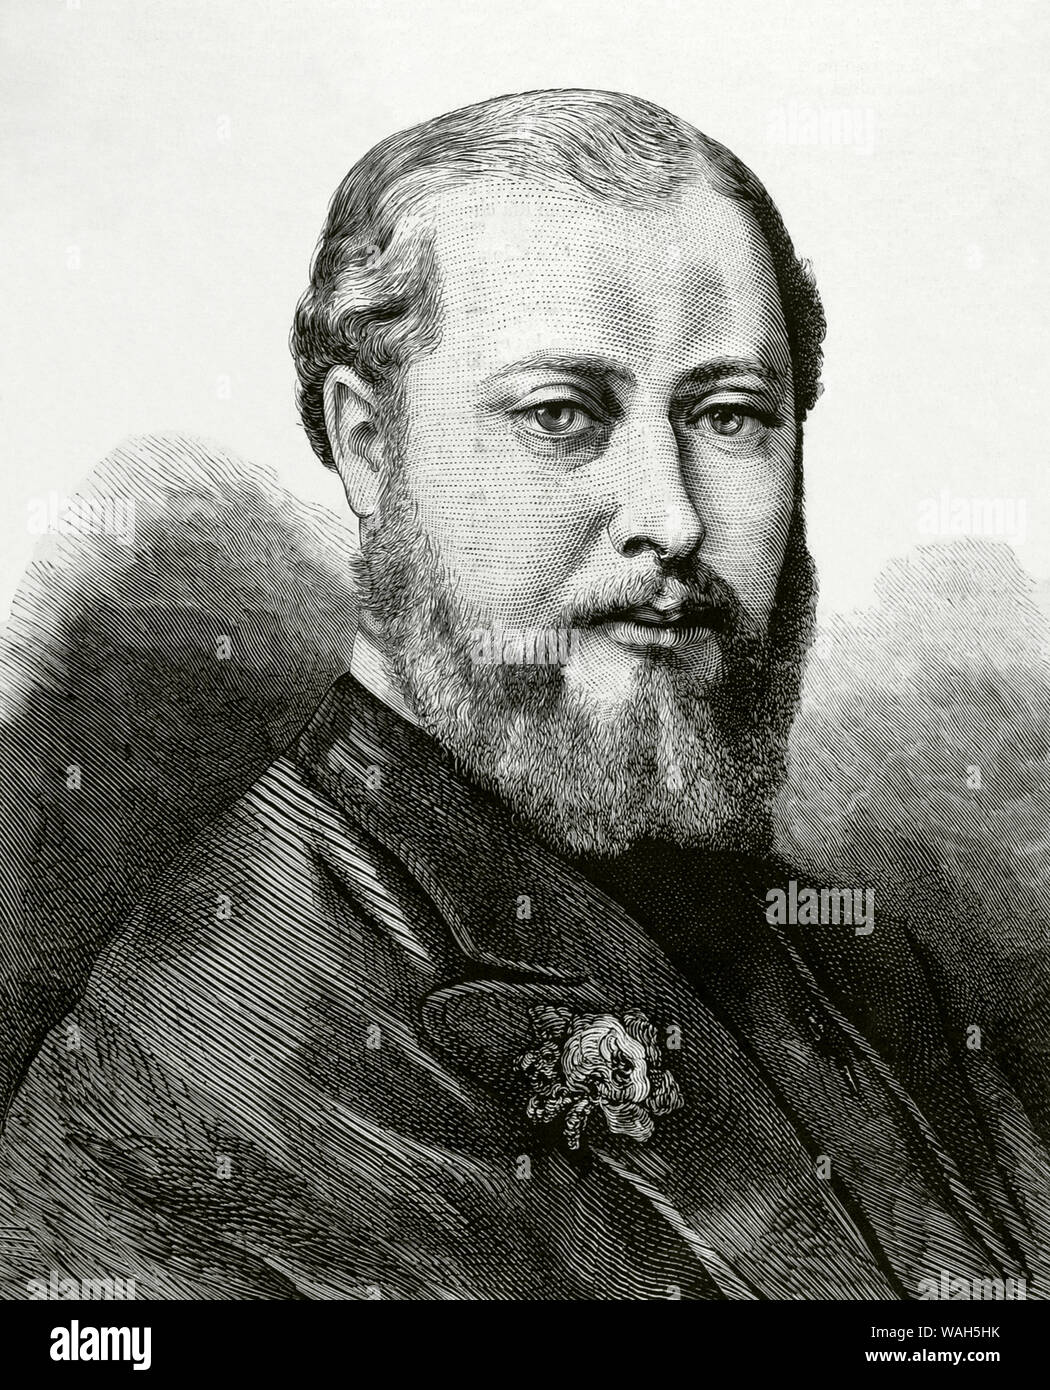 Edward VII (1841-1910). King of the United Kingdom of Great Britain and Ireland and of the British dominions and emperor of India from 1901. He was the eldest son of Queen Victoria. Portrait as The Prince Albert Edward, future Edward VII. Engraving. La Ilustracion Española y Americana, April 22, 1876. Stock Photo